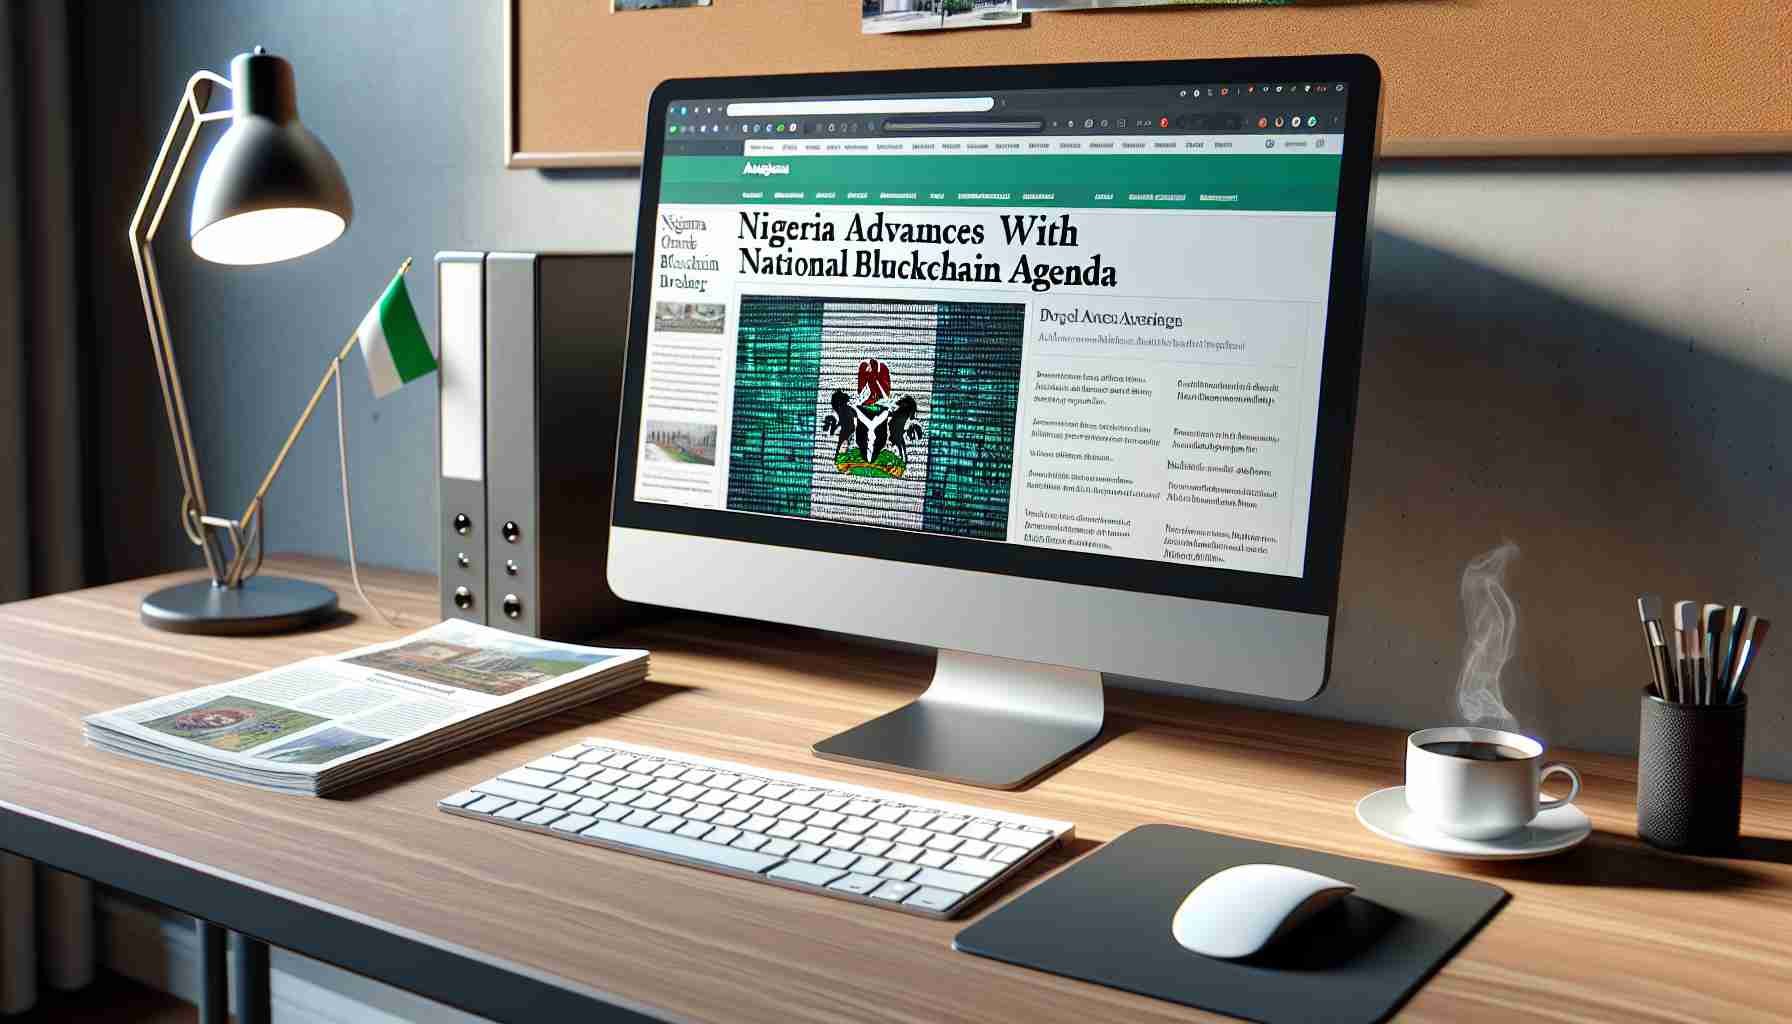 A hyper-realistic image capturing a computer screen displaying a news headline that says 'Nigeria Advances with National Blockchain Agenda.' The screen is within a modern workspace, complete with a keyboard, mouse, and a cup of coffee on a wood desk. Depict subtle elements of Nigeria subtly throughout the scene, such as a flag, traditional artwork or patterns, and photographs of popular landmarks.